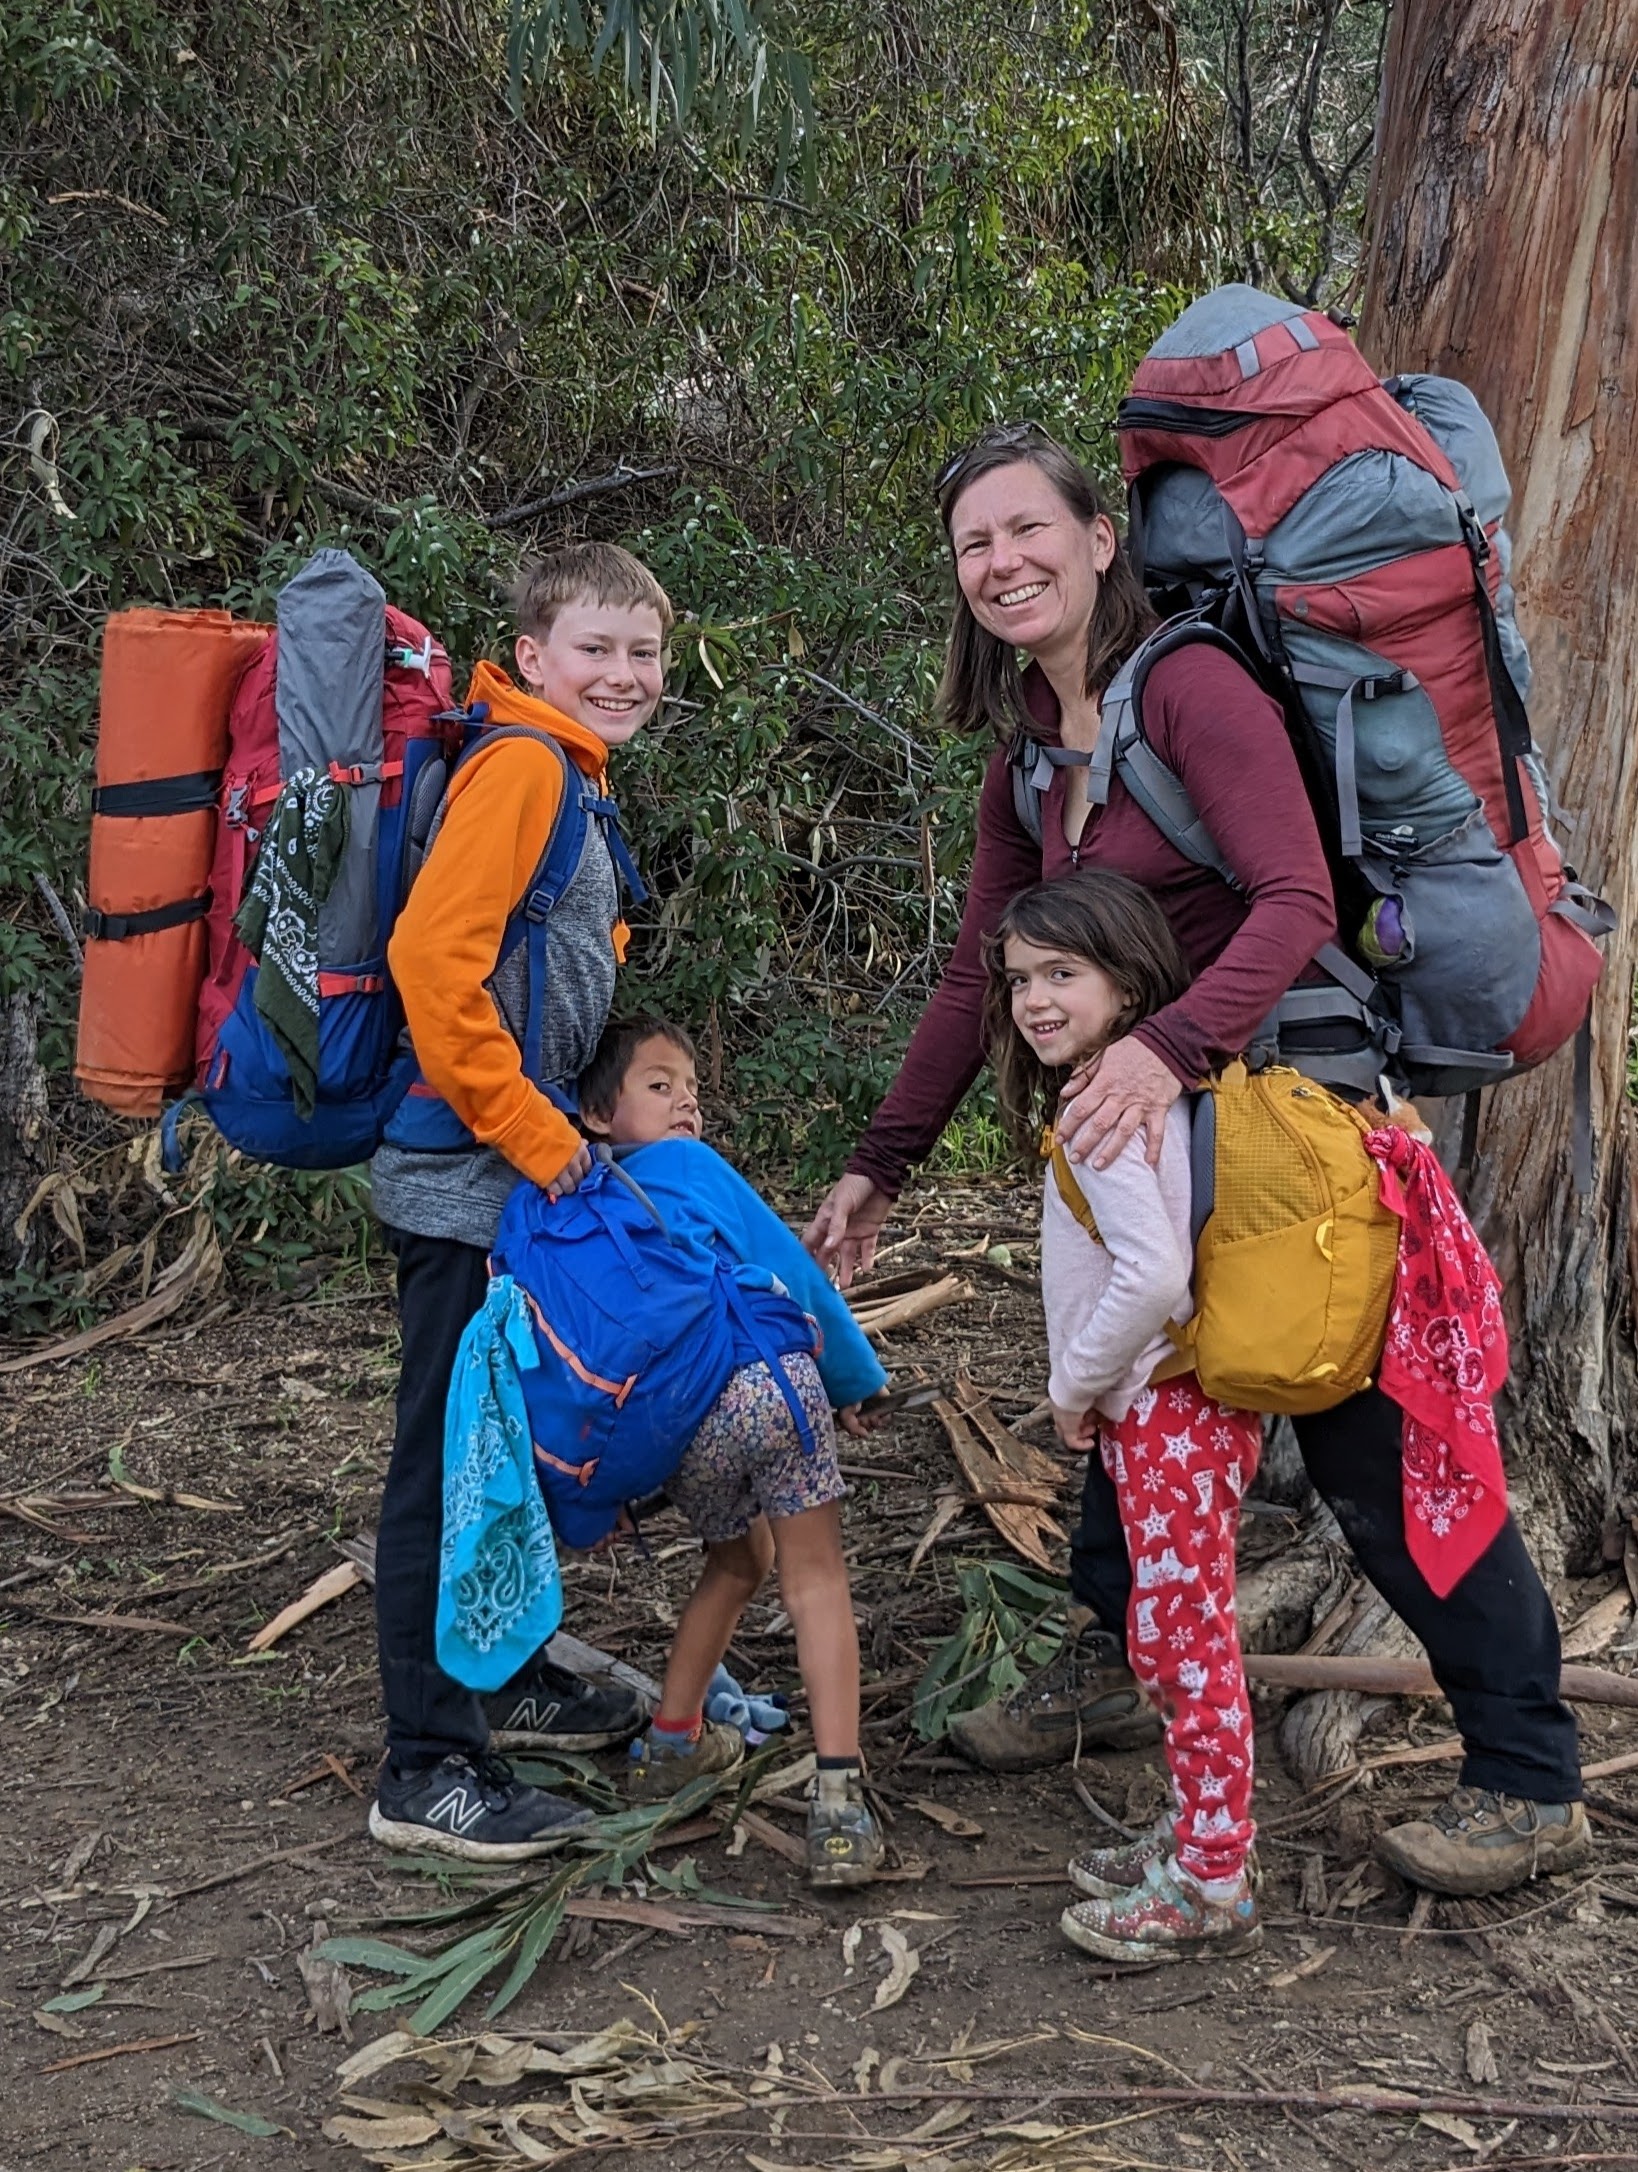 Tania with her three kids on a backpacking trip in the Santa Monica mountains.